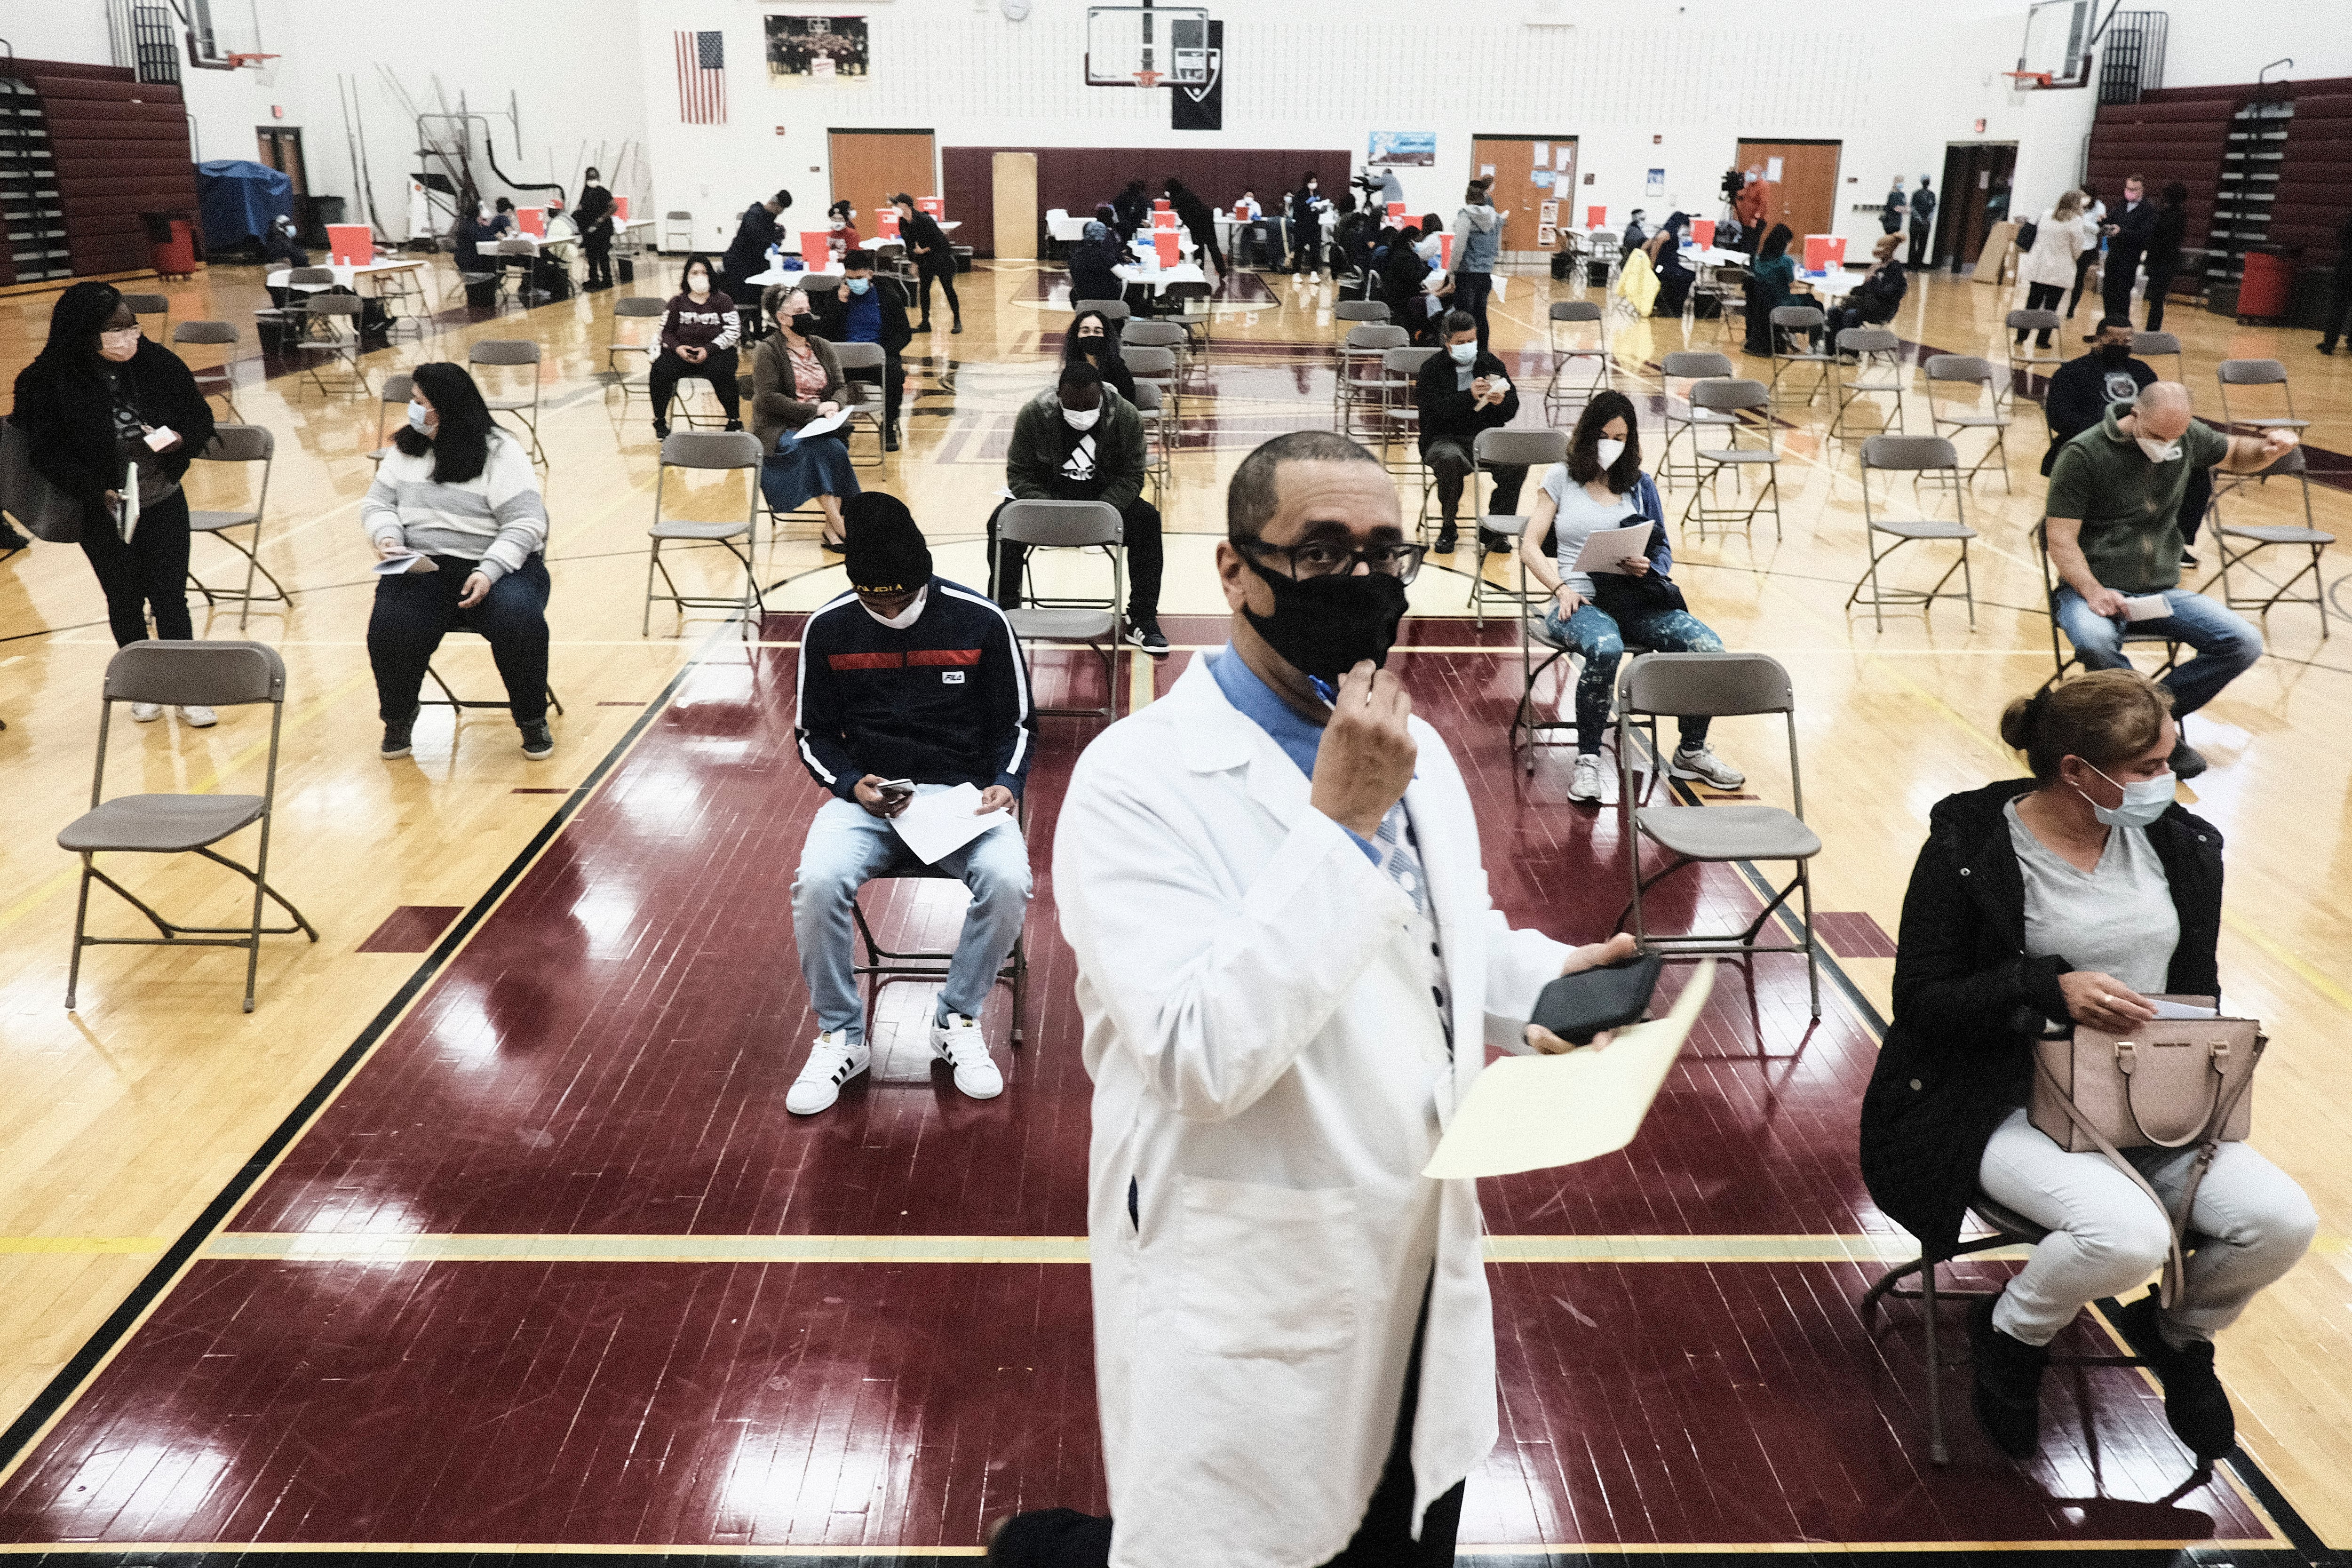 A doctor stands in front of rows of patients seated in a school gymnasium.